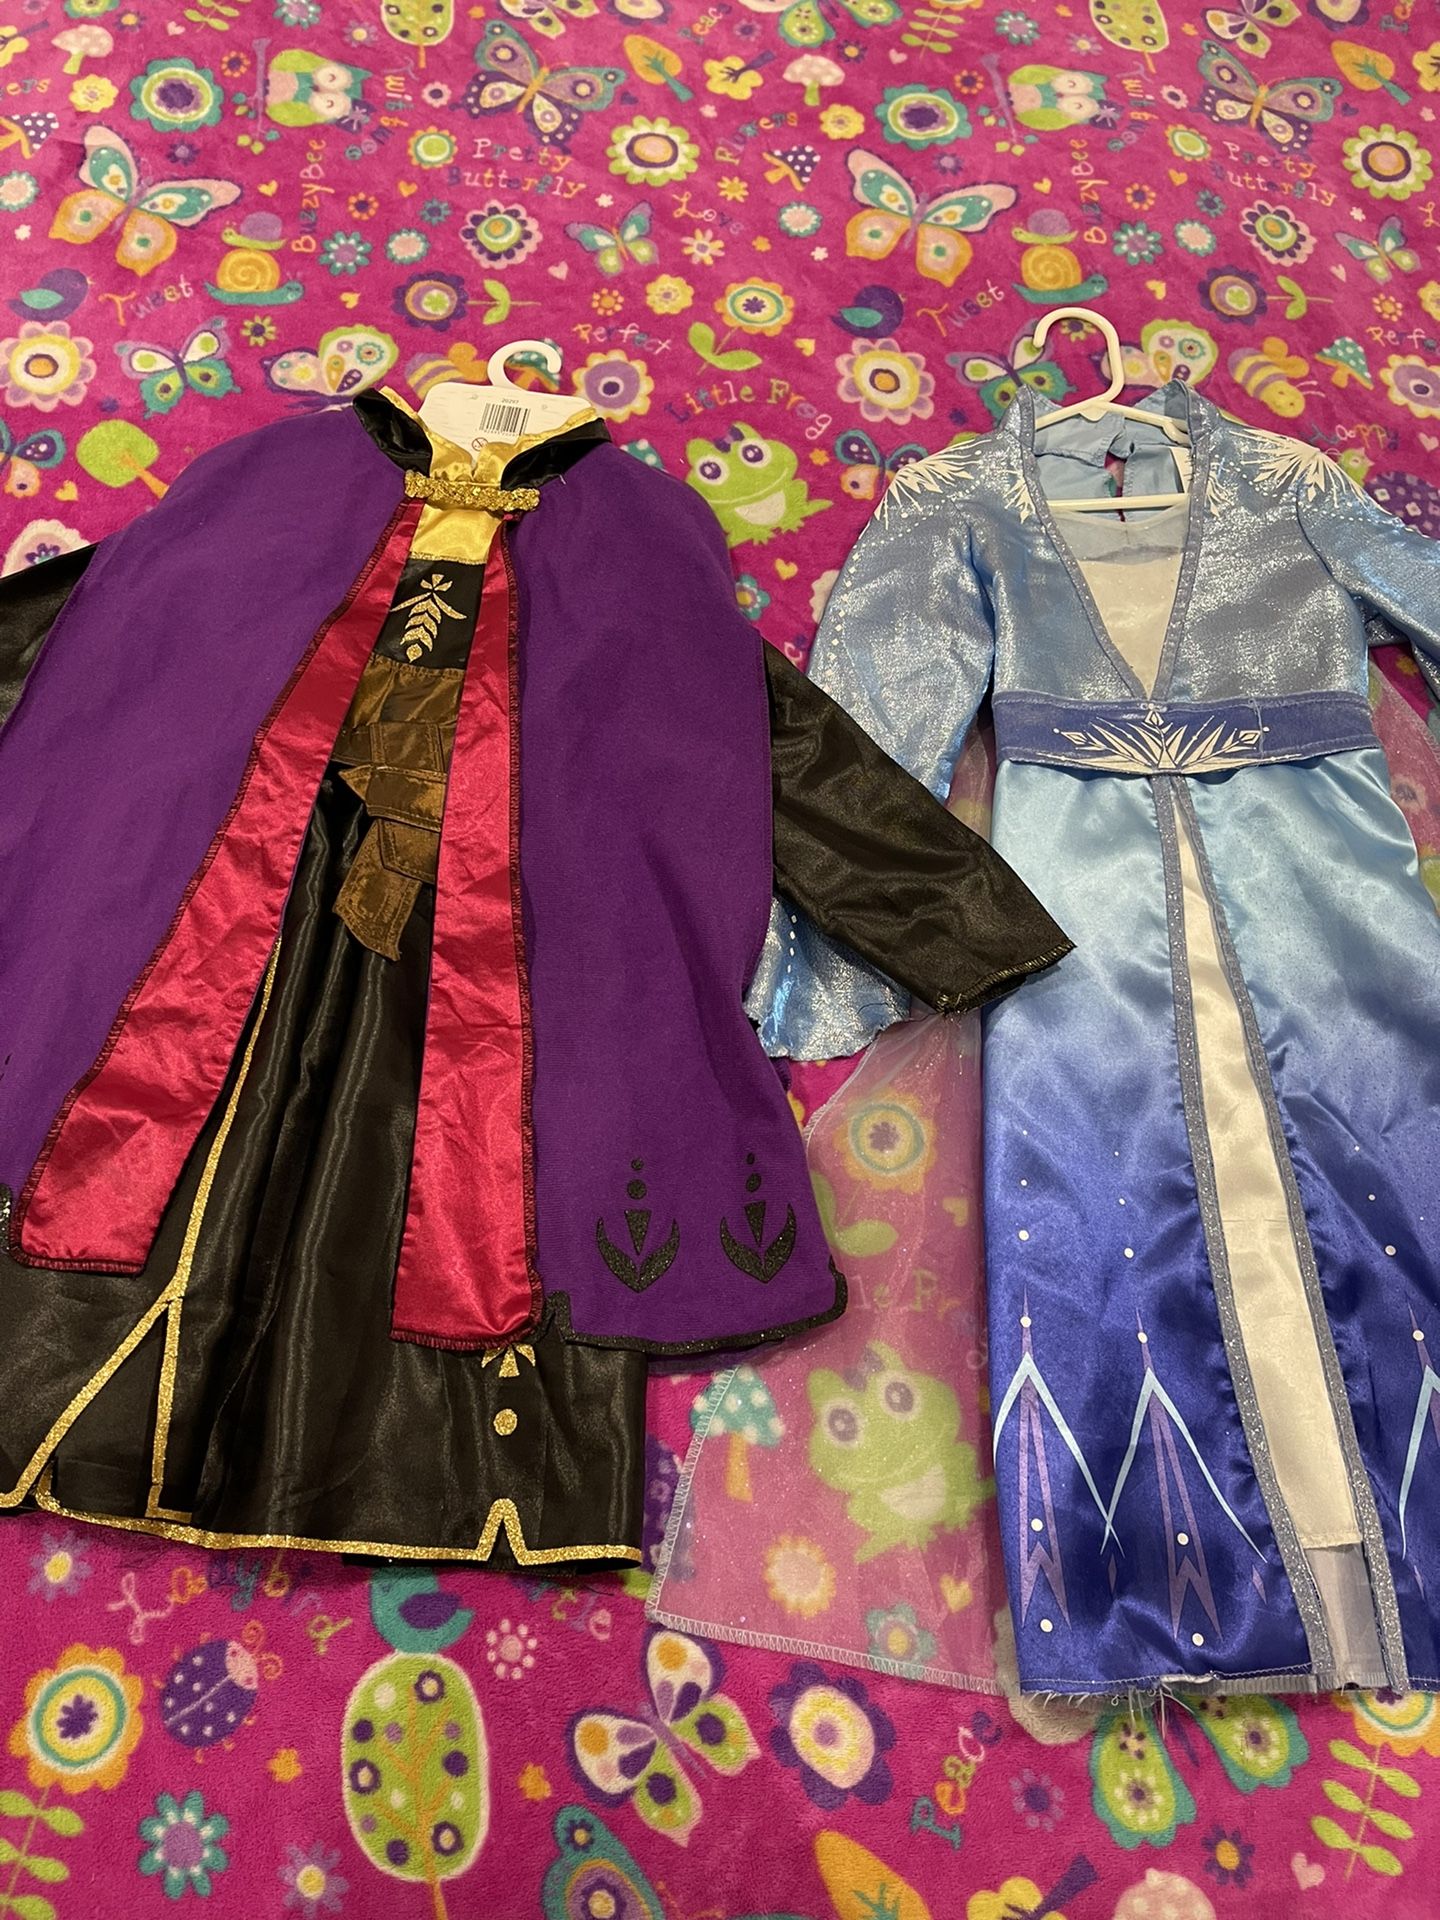 Anna And Elsa Costumes 6x Size $20 Each Or $35For Both 